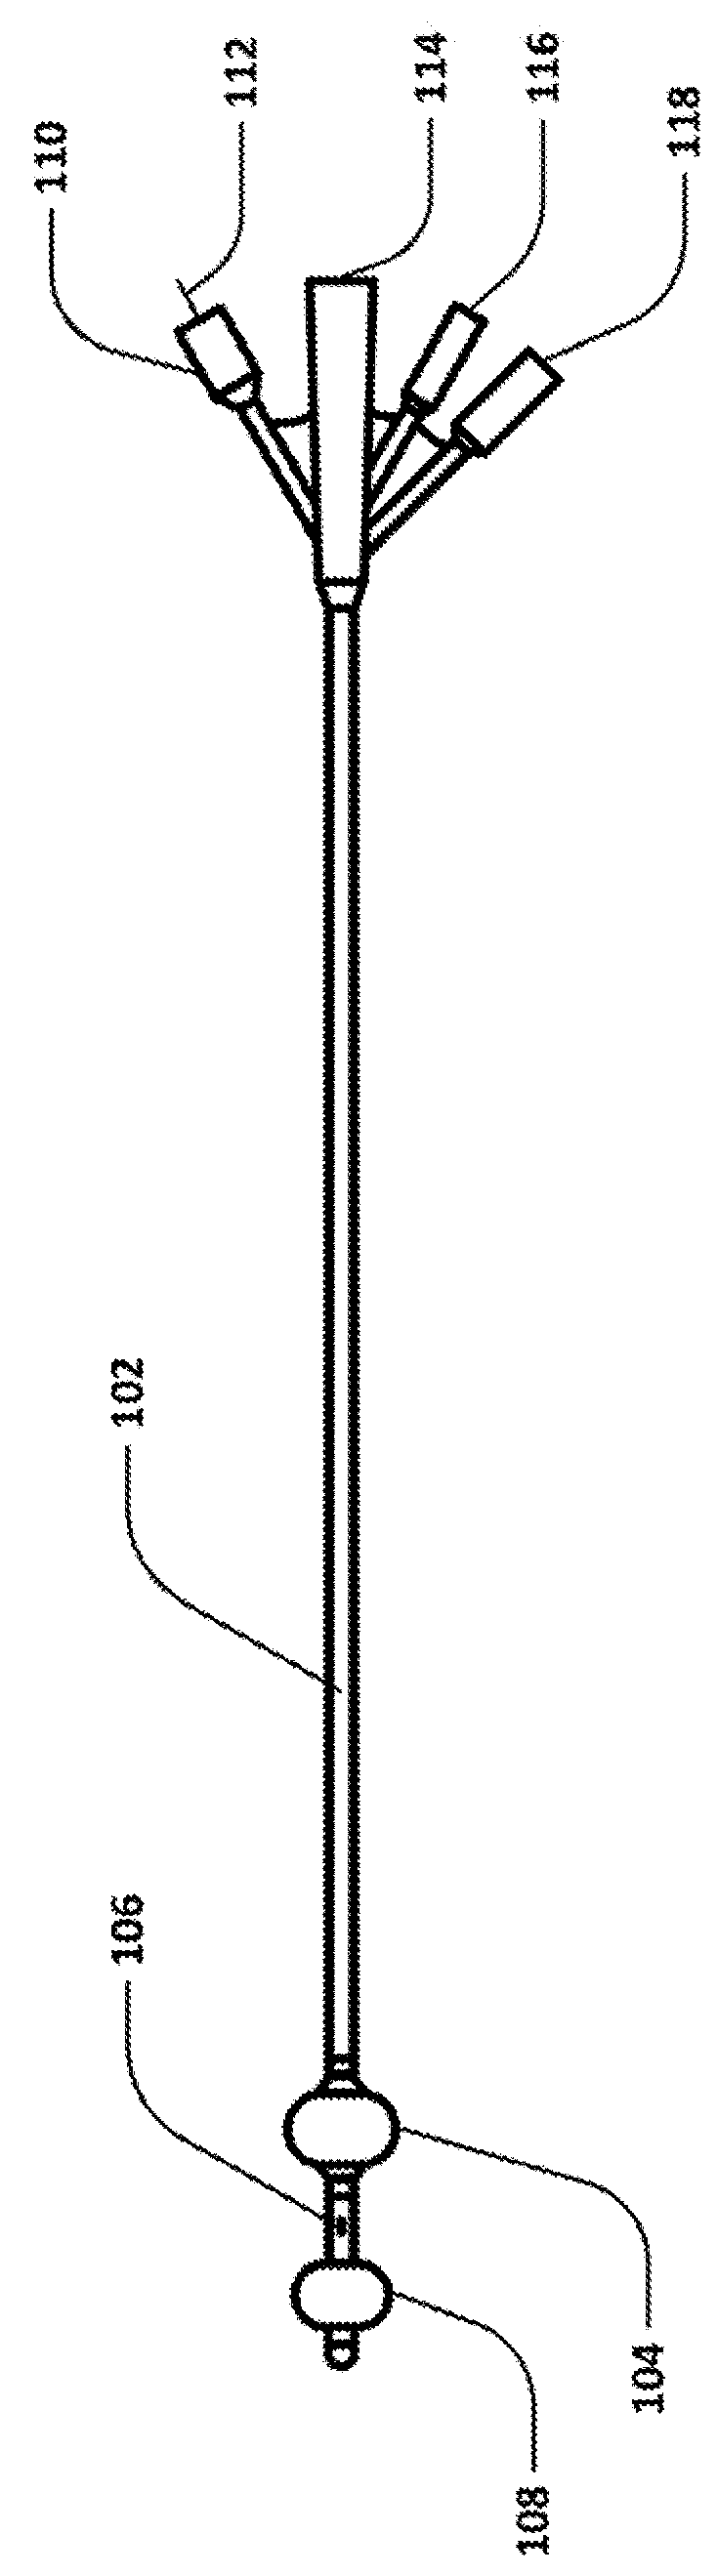 Systems, devices and methods for sensing physiologic data and draining and analyzing bodily fluids